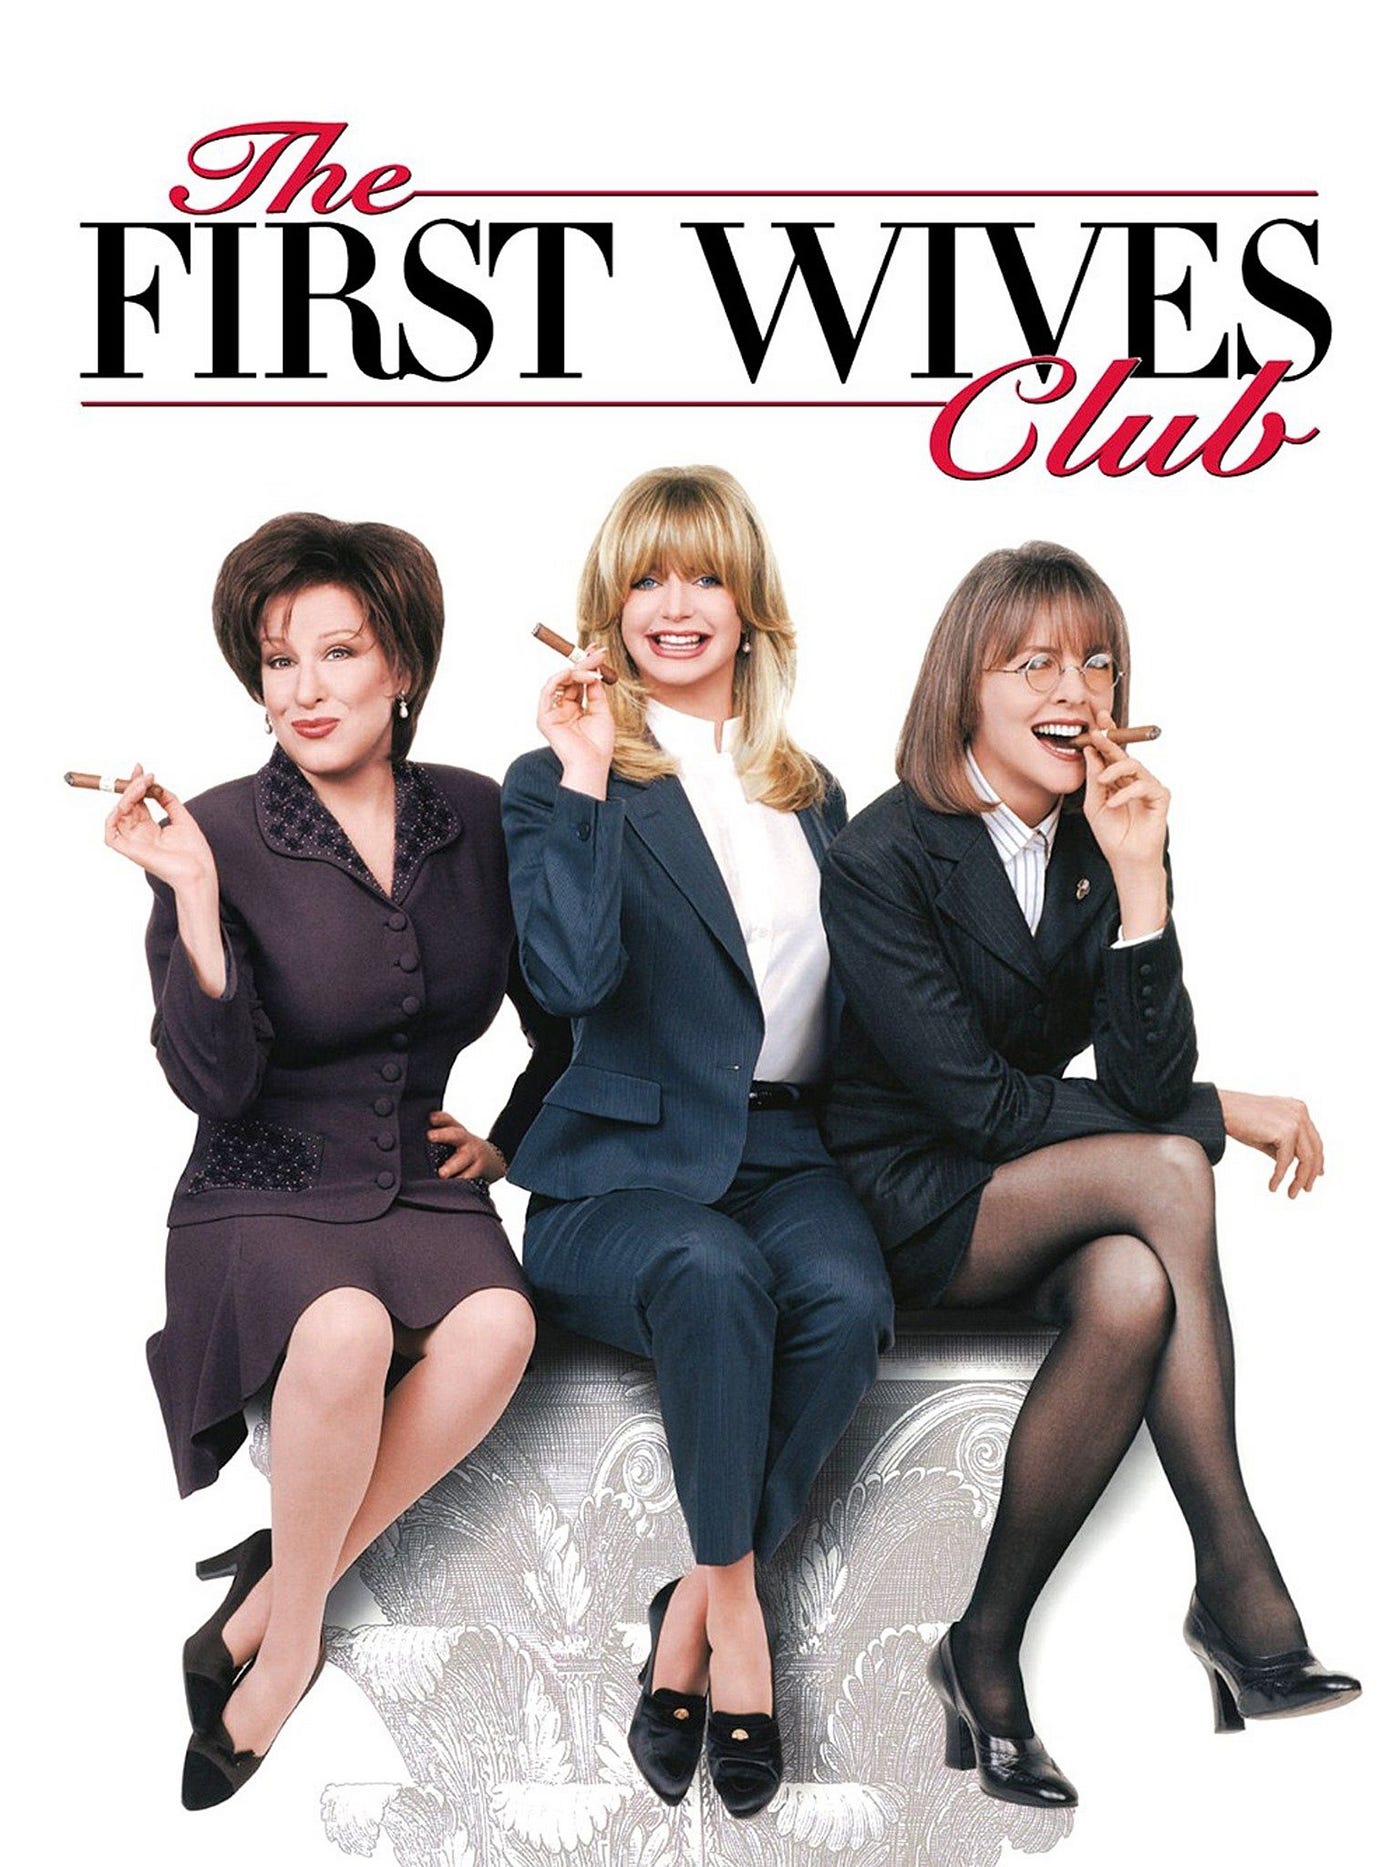 The First Wives Club” A Comedy Classic Turns 25 by Richard Rants and Raves Medium